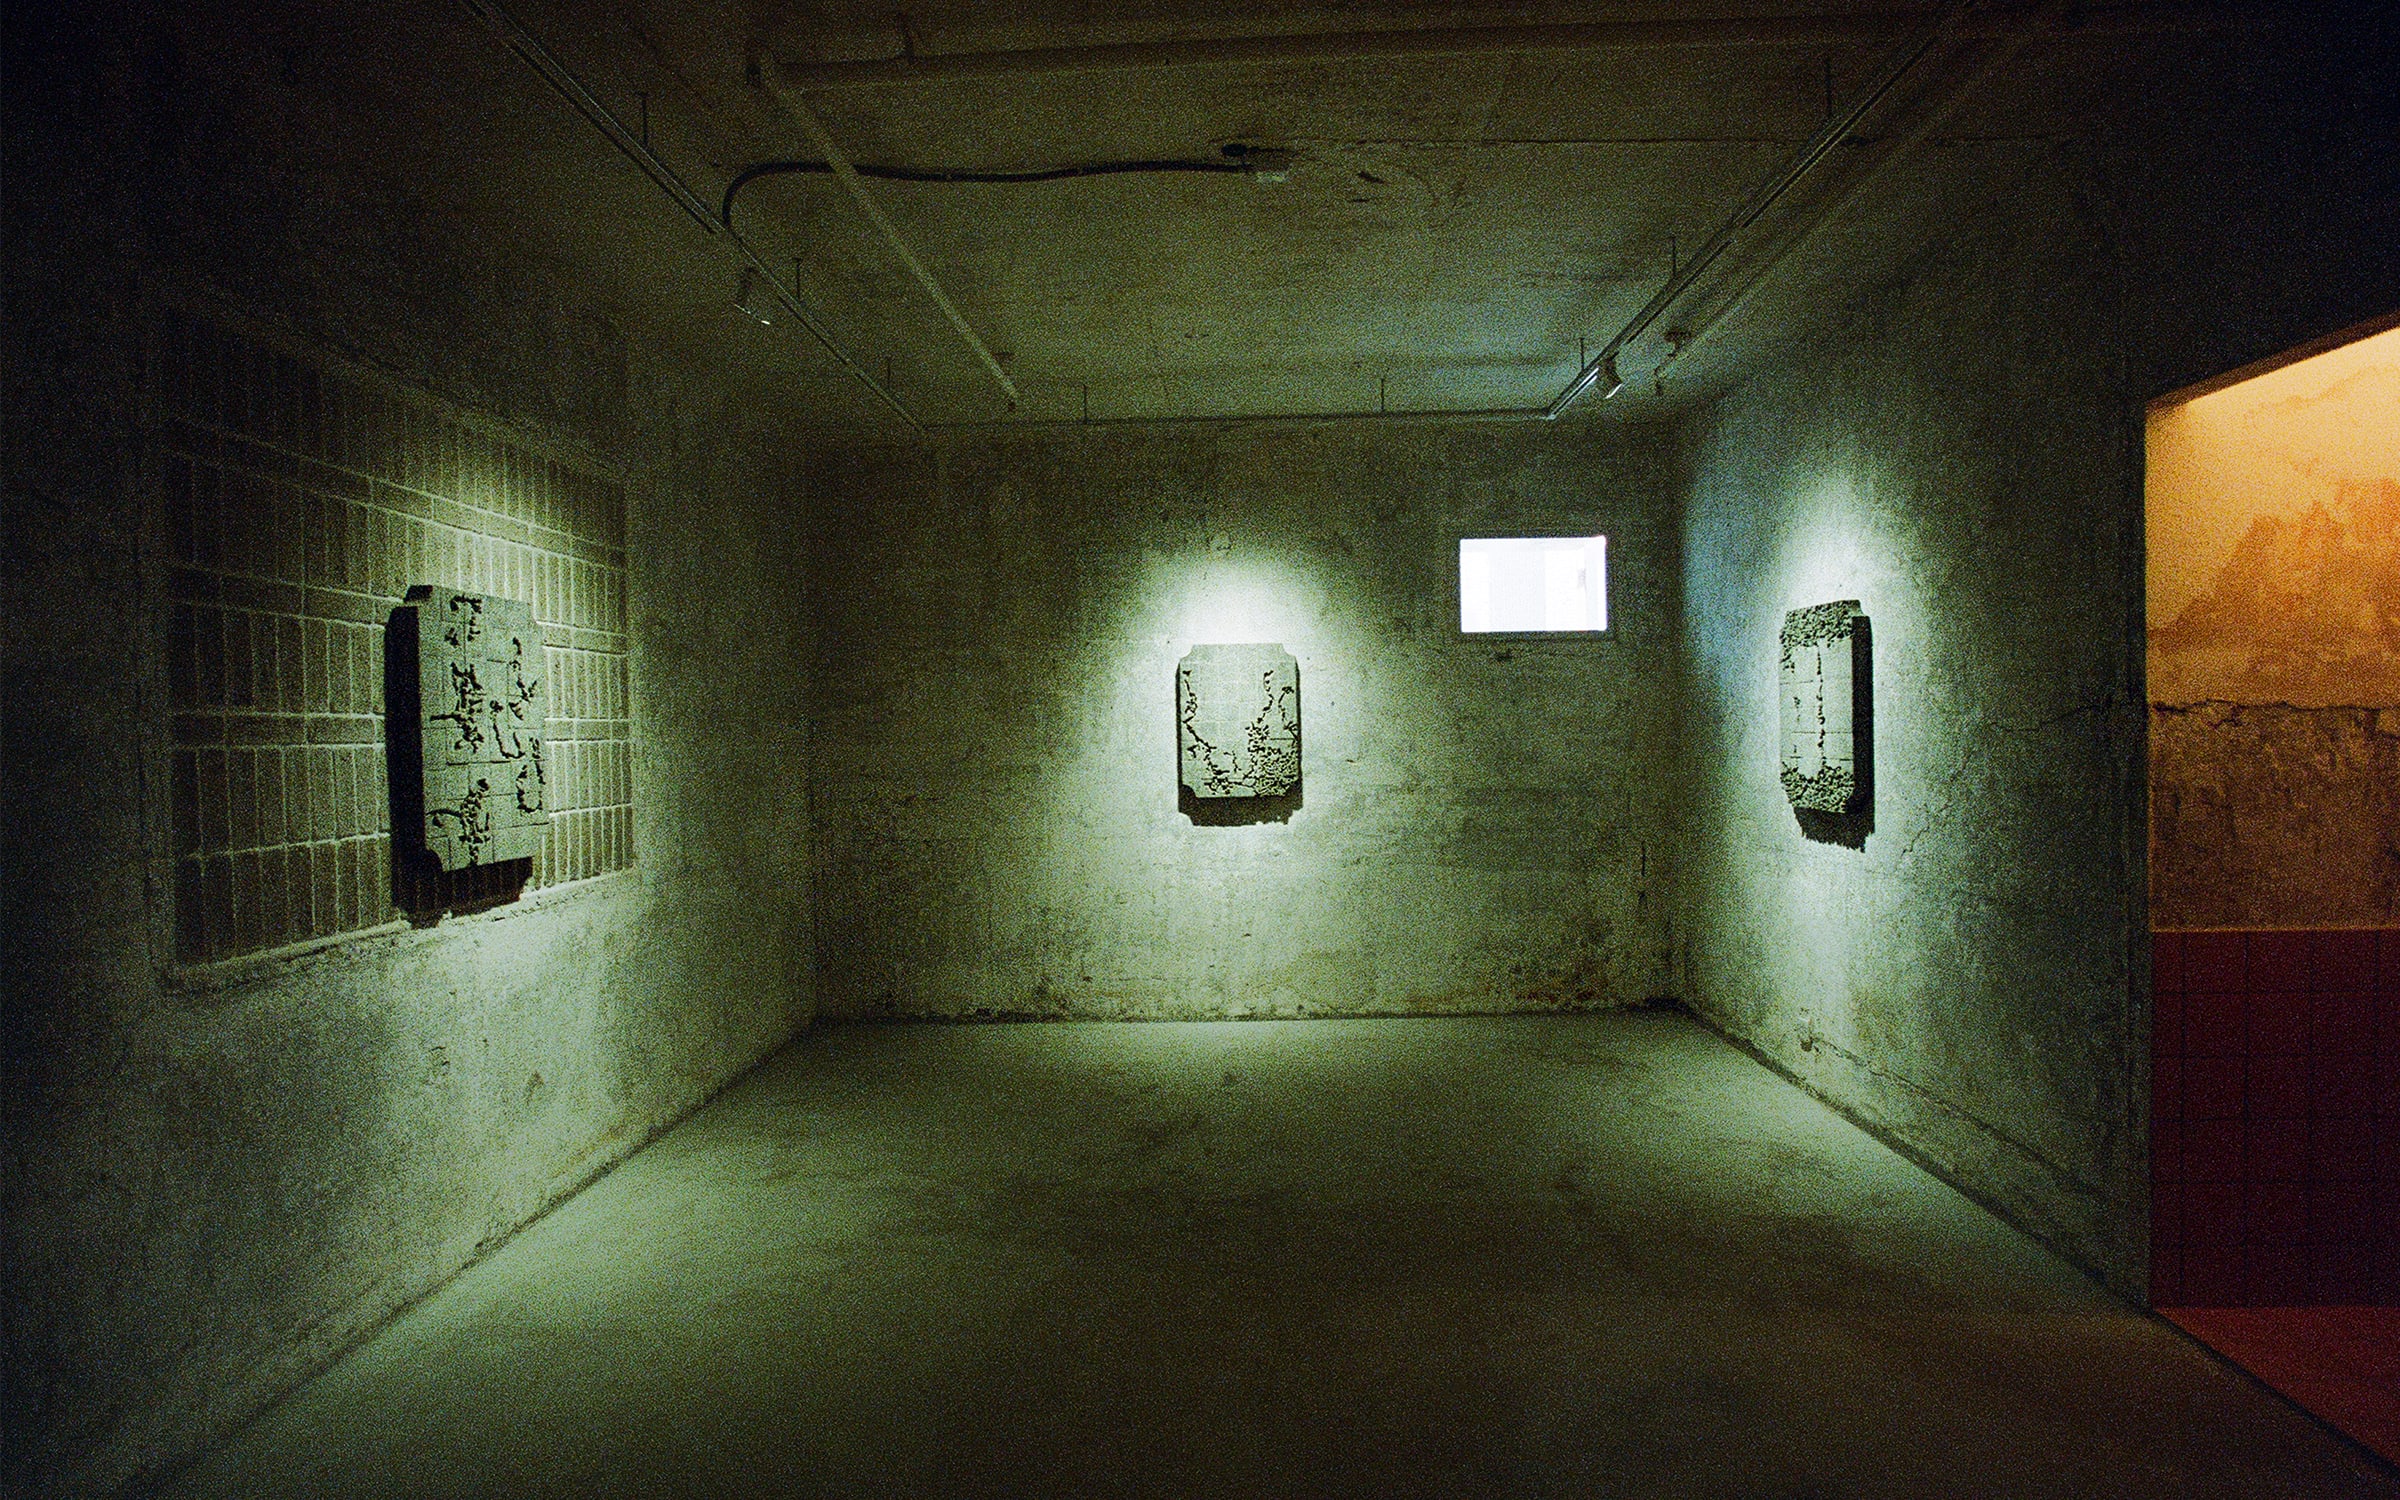 Installation view at Property Holdings Development Group (PHD Group). Photography by Luke Casey for Art Basel.